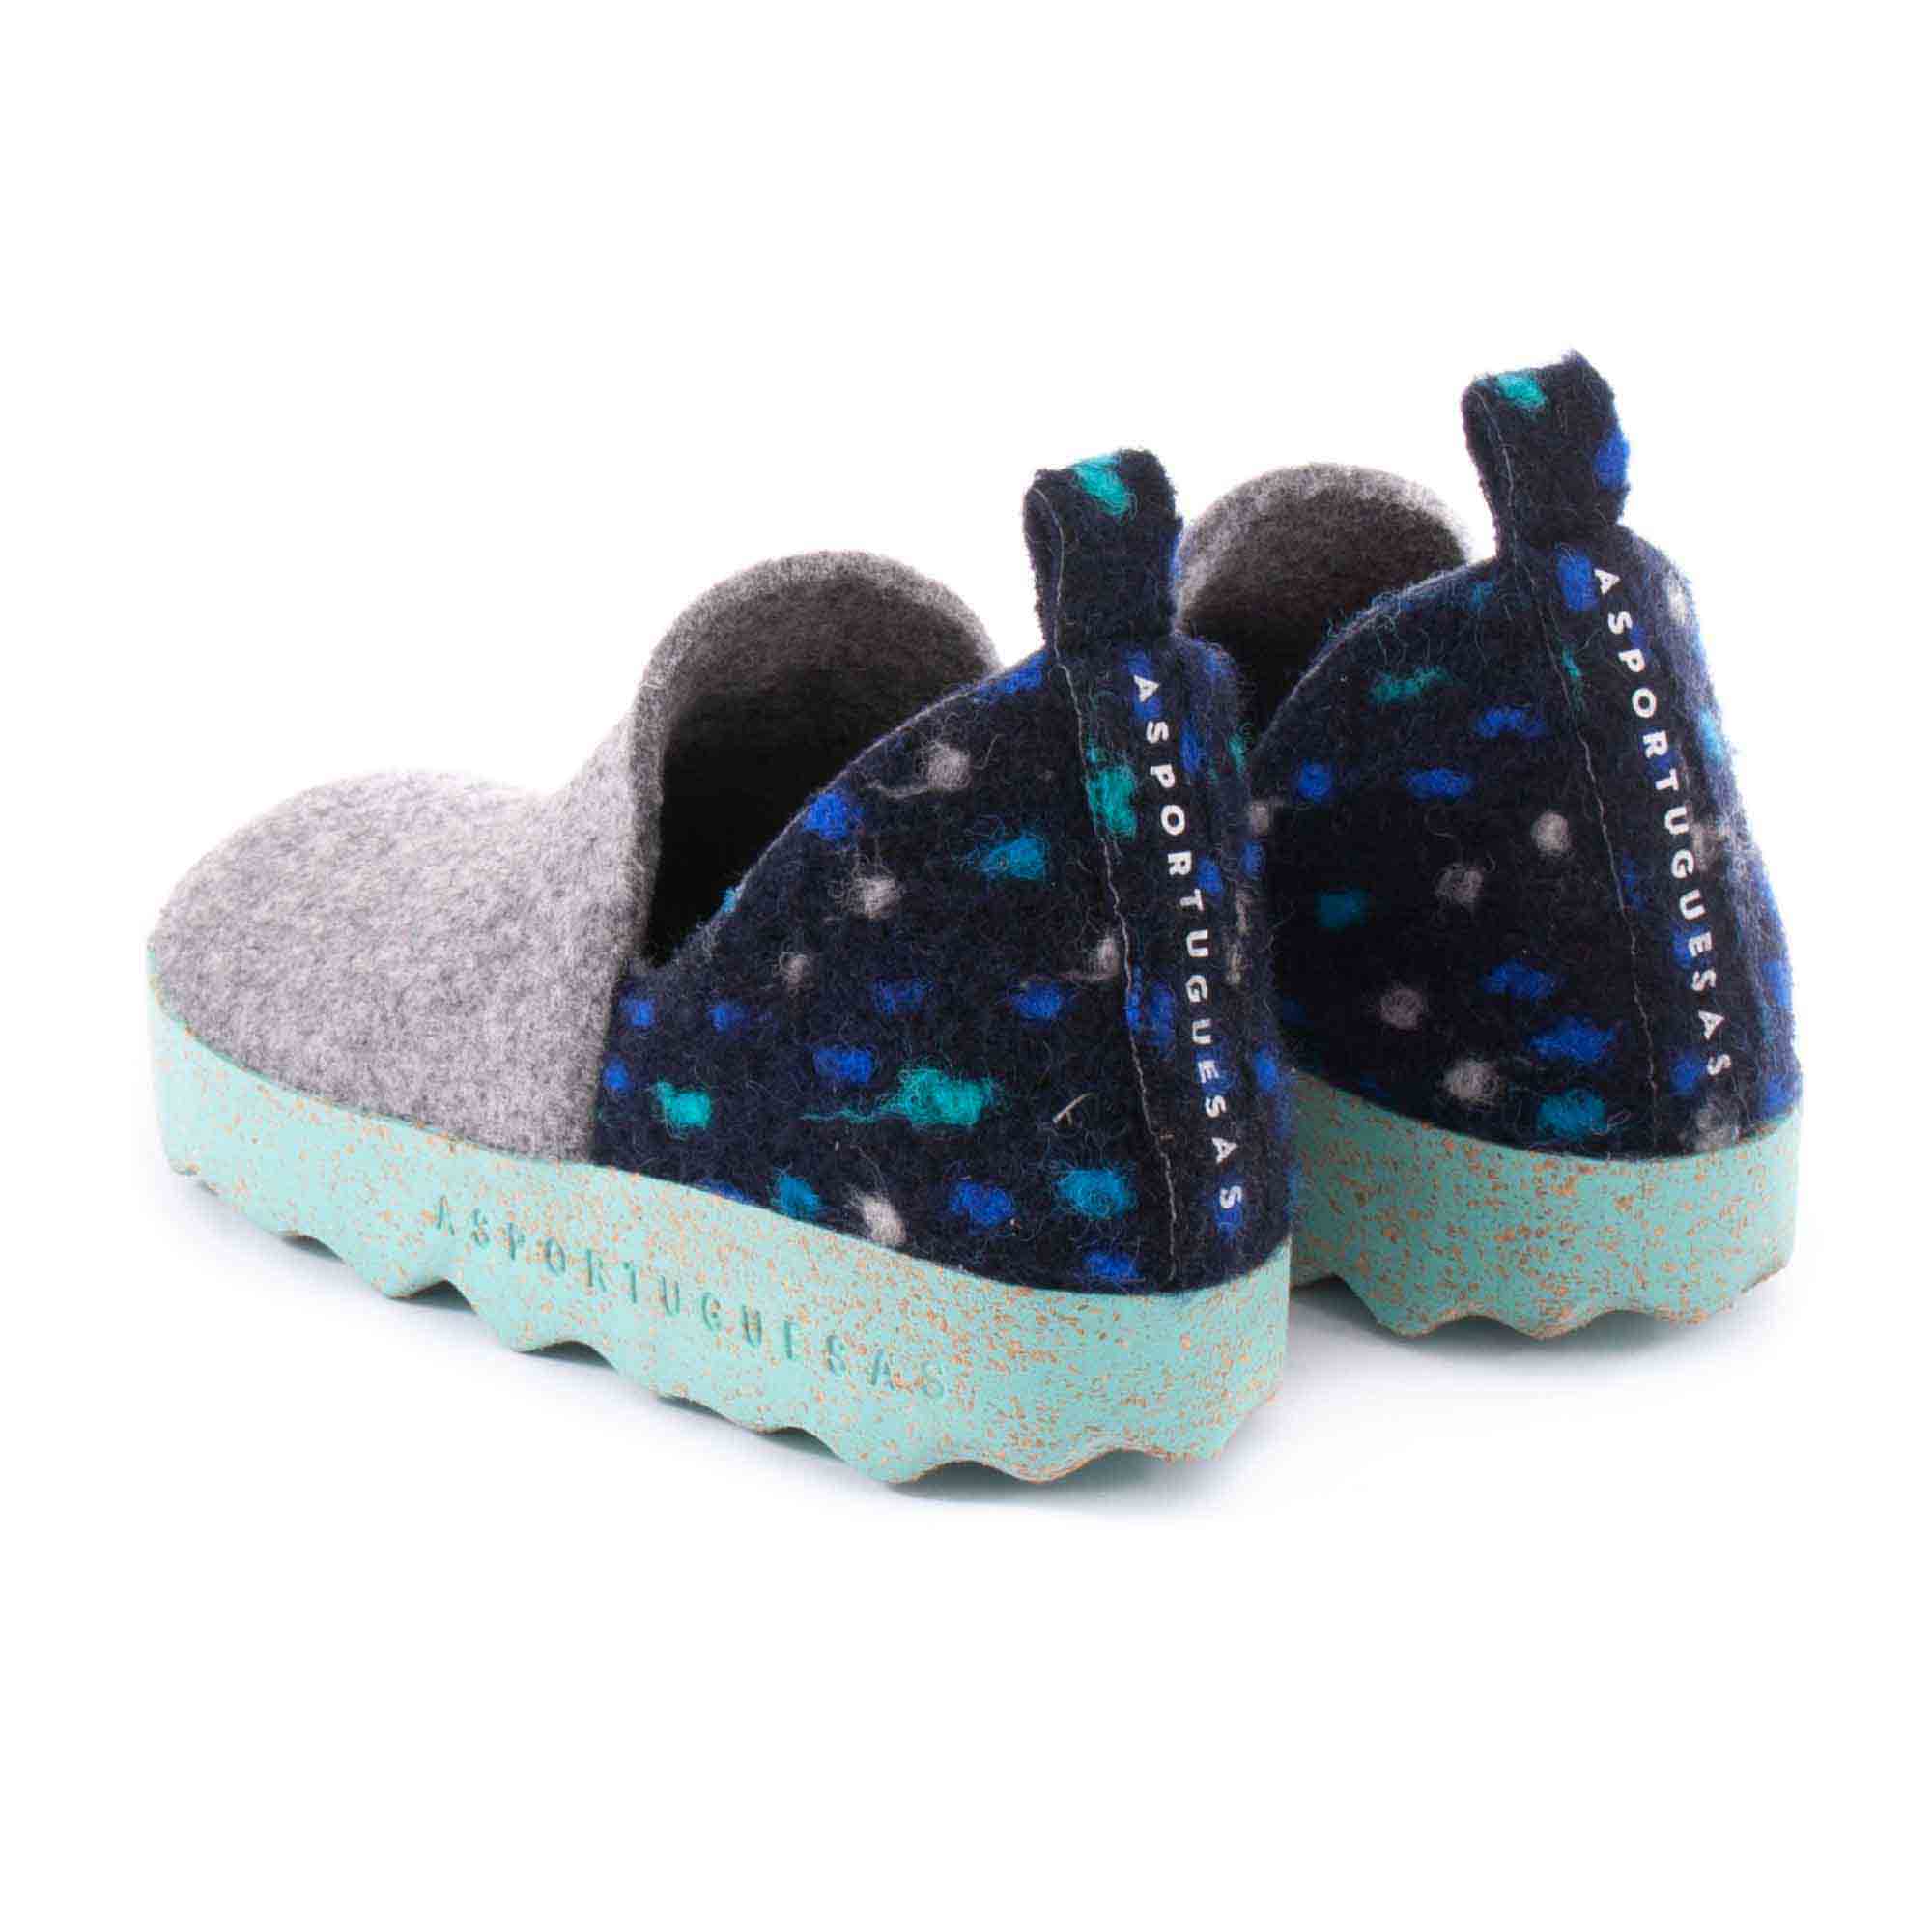 Fly Flot Slippers House Shoe Slippers Clogs Shoes 864135 Blue New | eBay